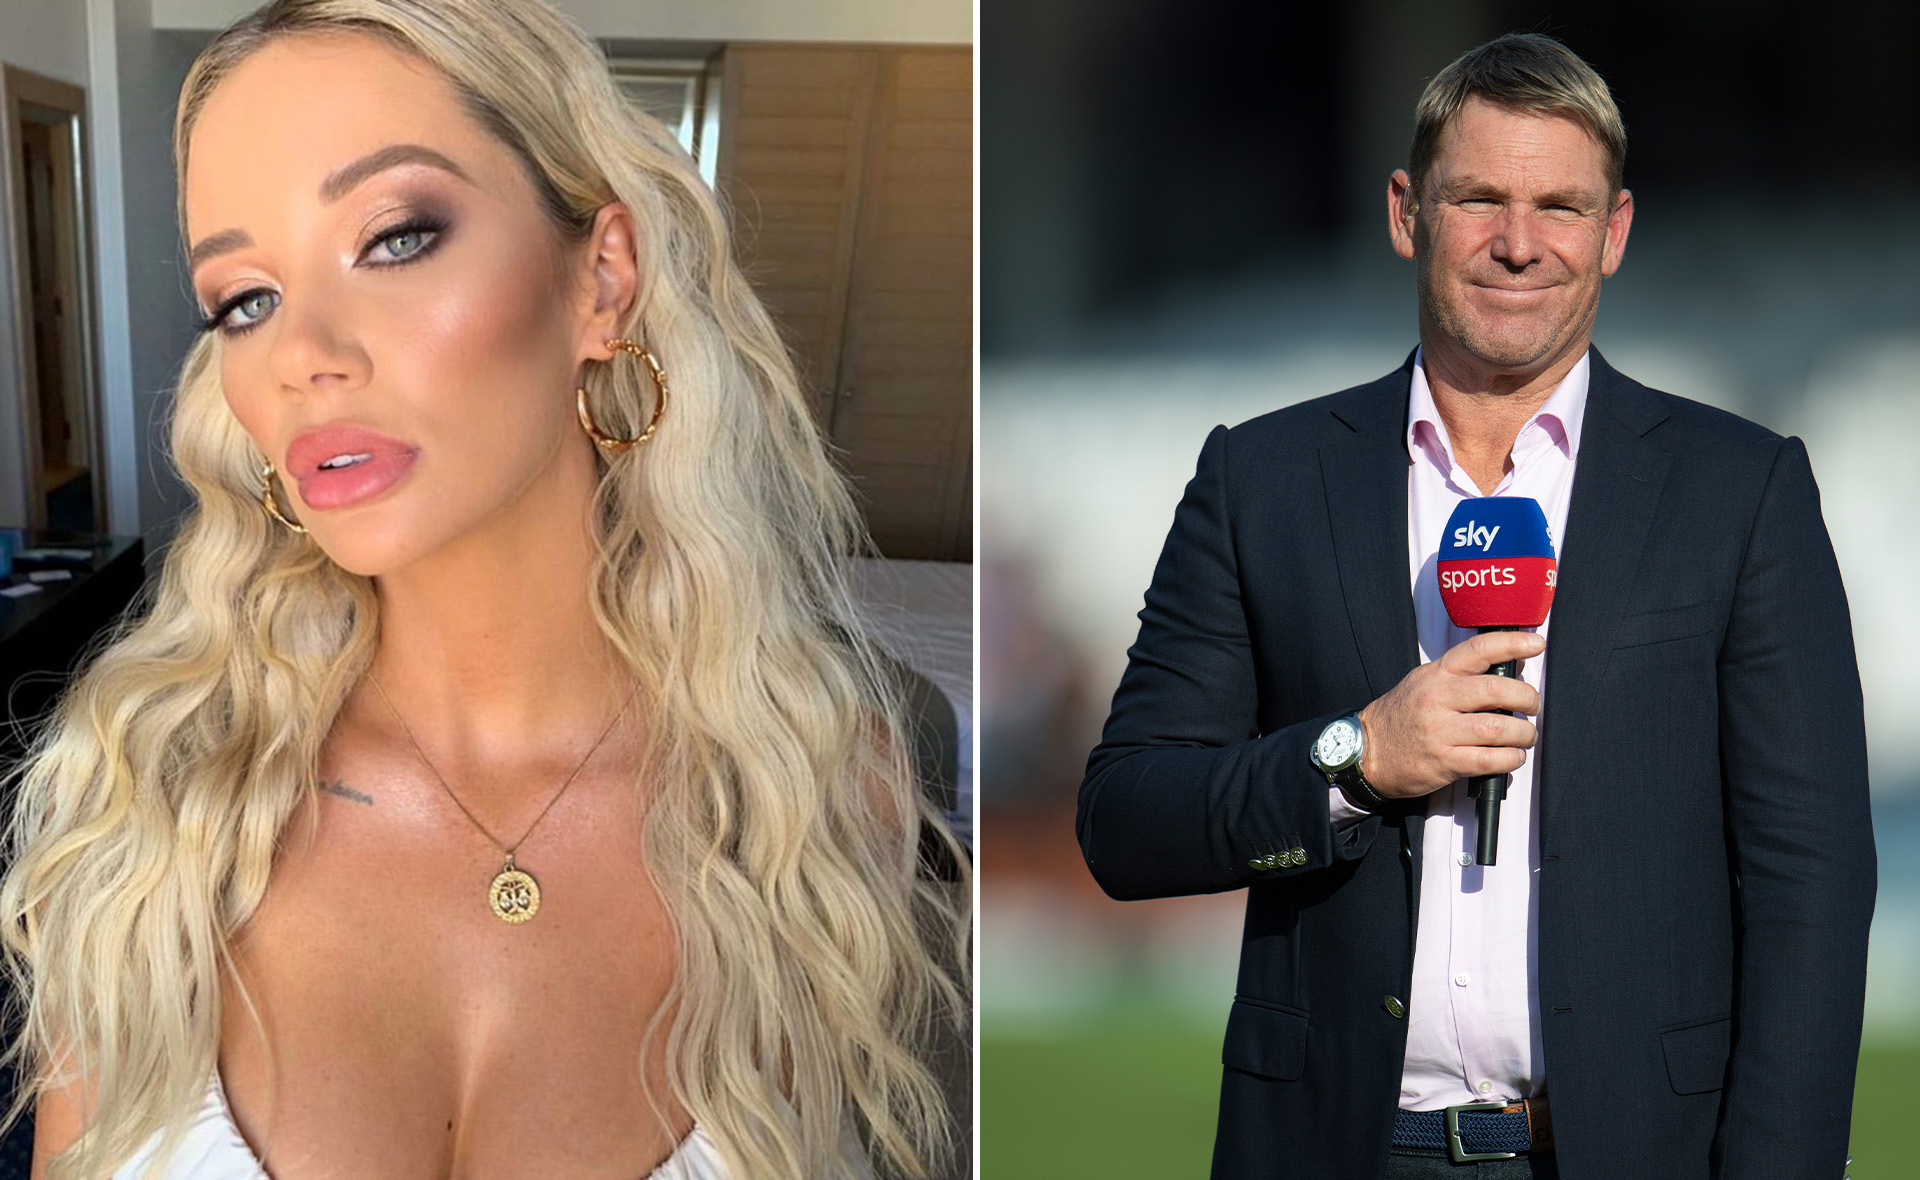 Jessika Power reveals the details of Shane Warne’s “X-rated” messages and another Big Brother VIP housemate admits the cricketer also contacted her